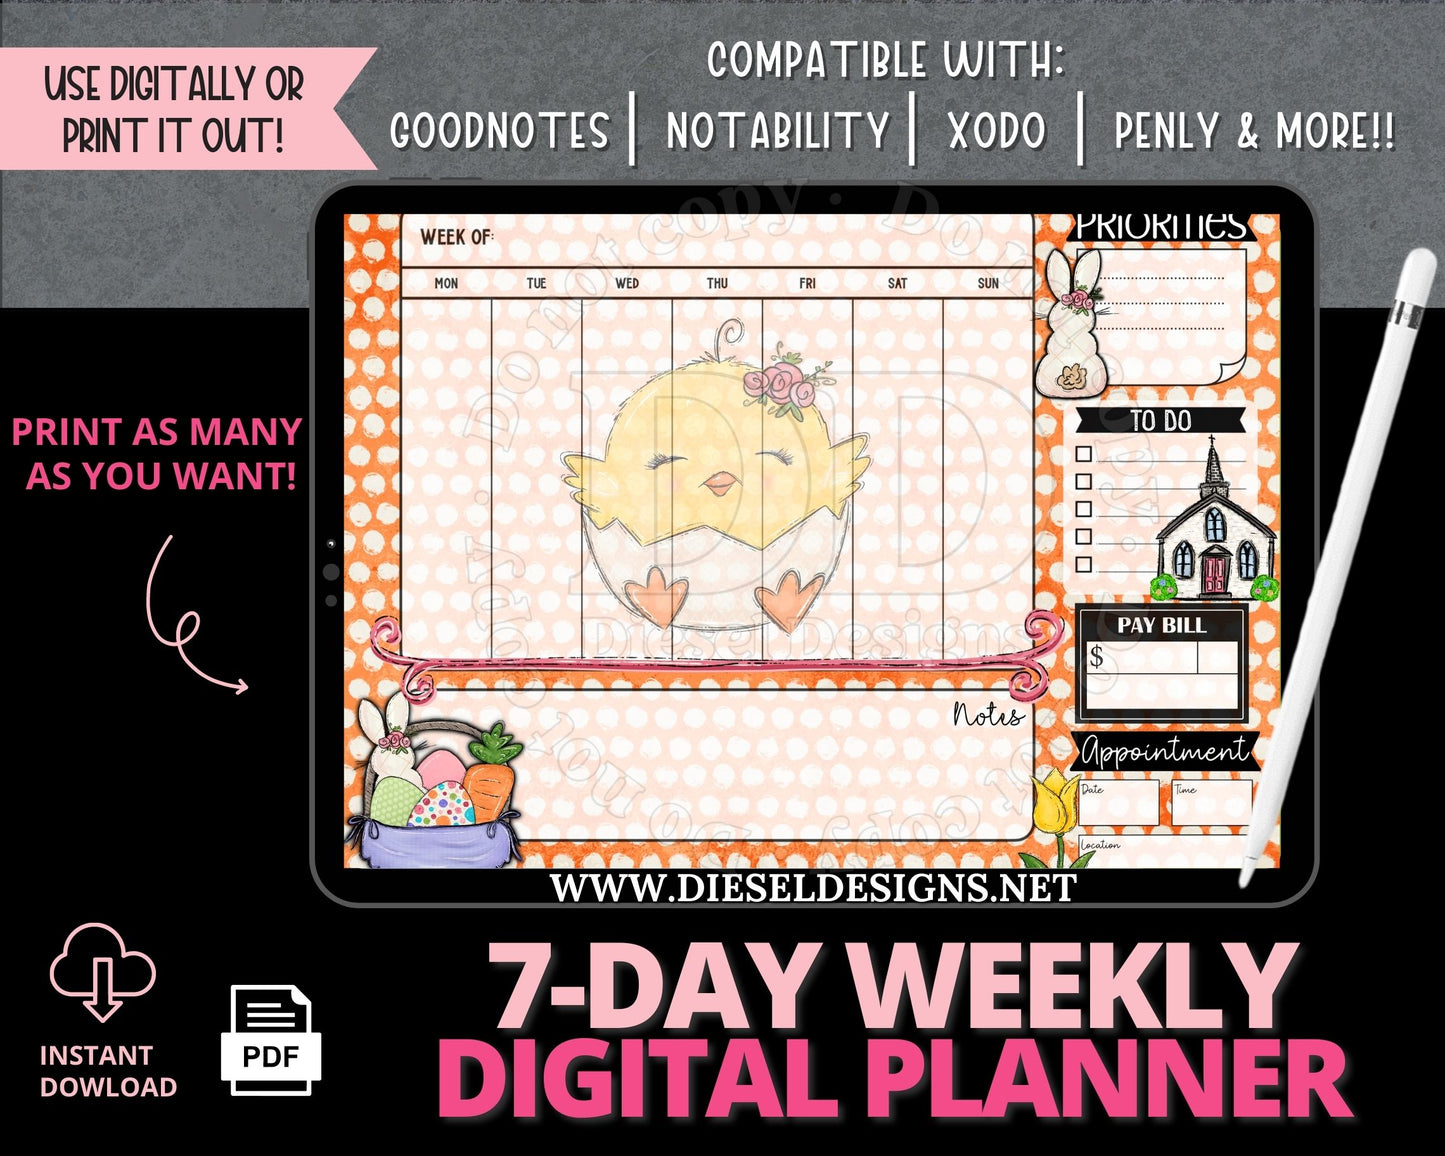 Weekly Planner 4 | 7-Day Digital Planner | 300 DPI | PNG & PDF included